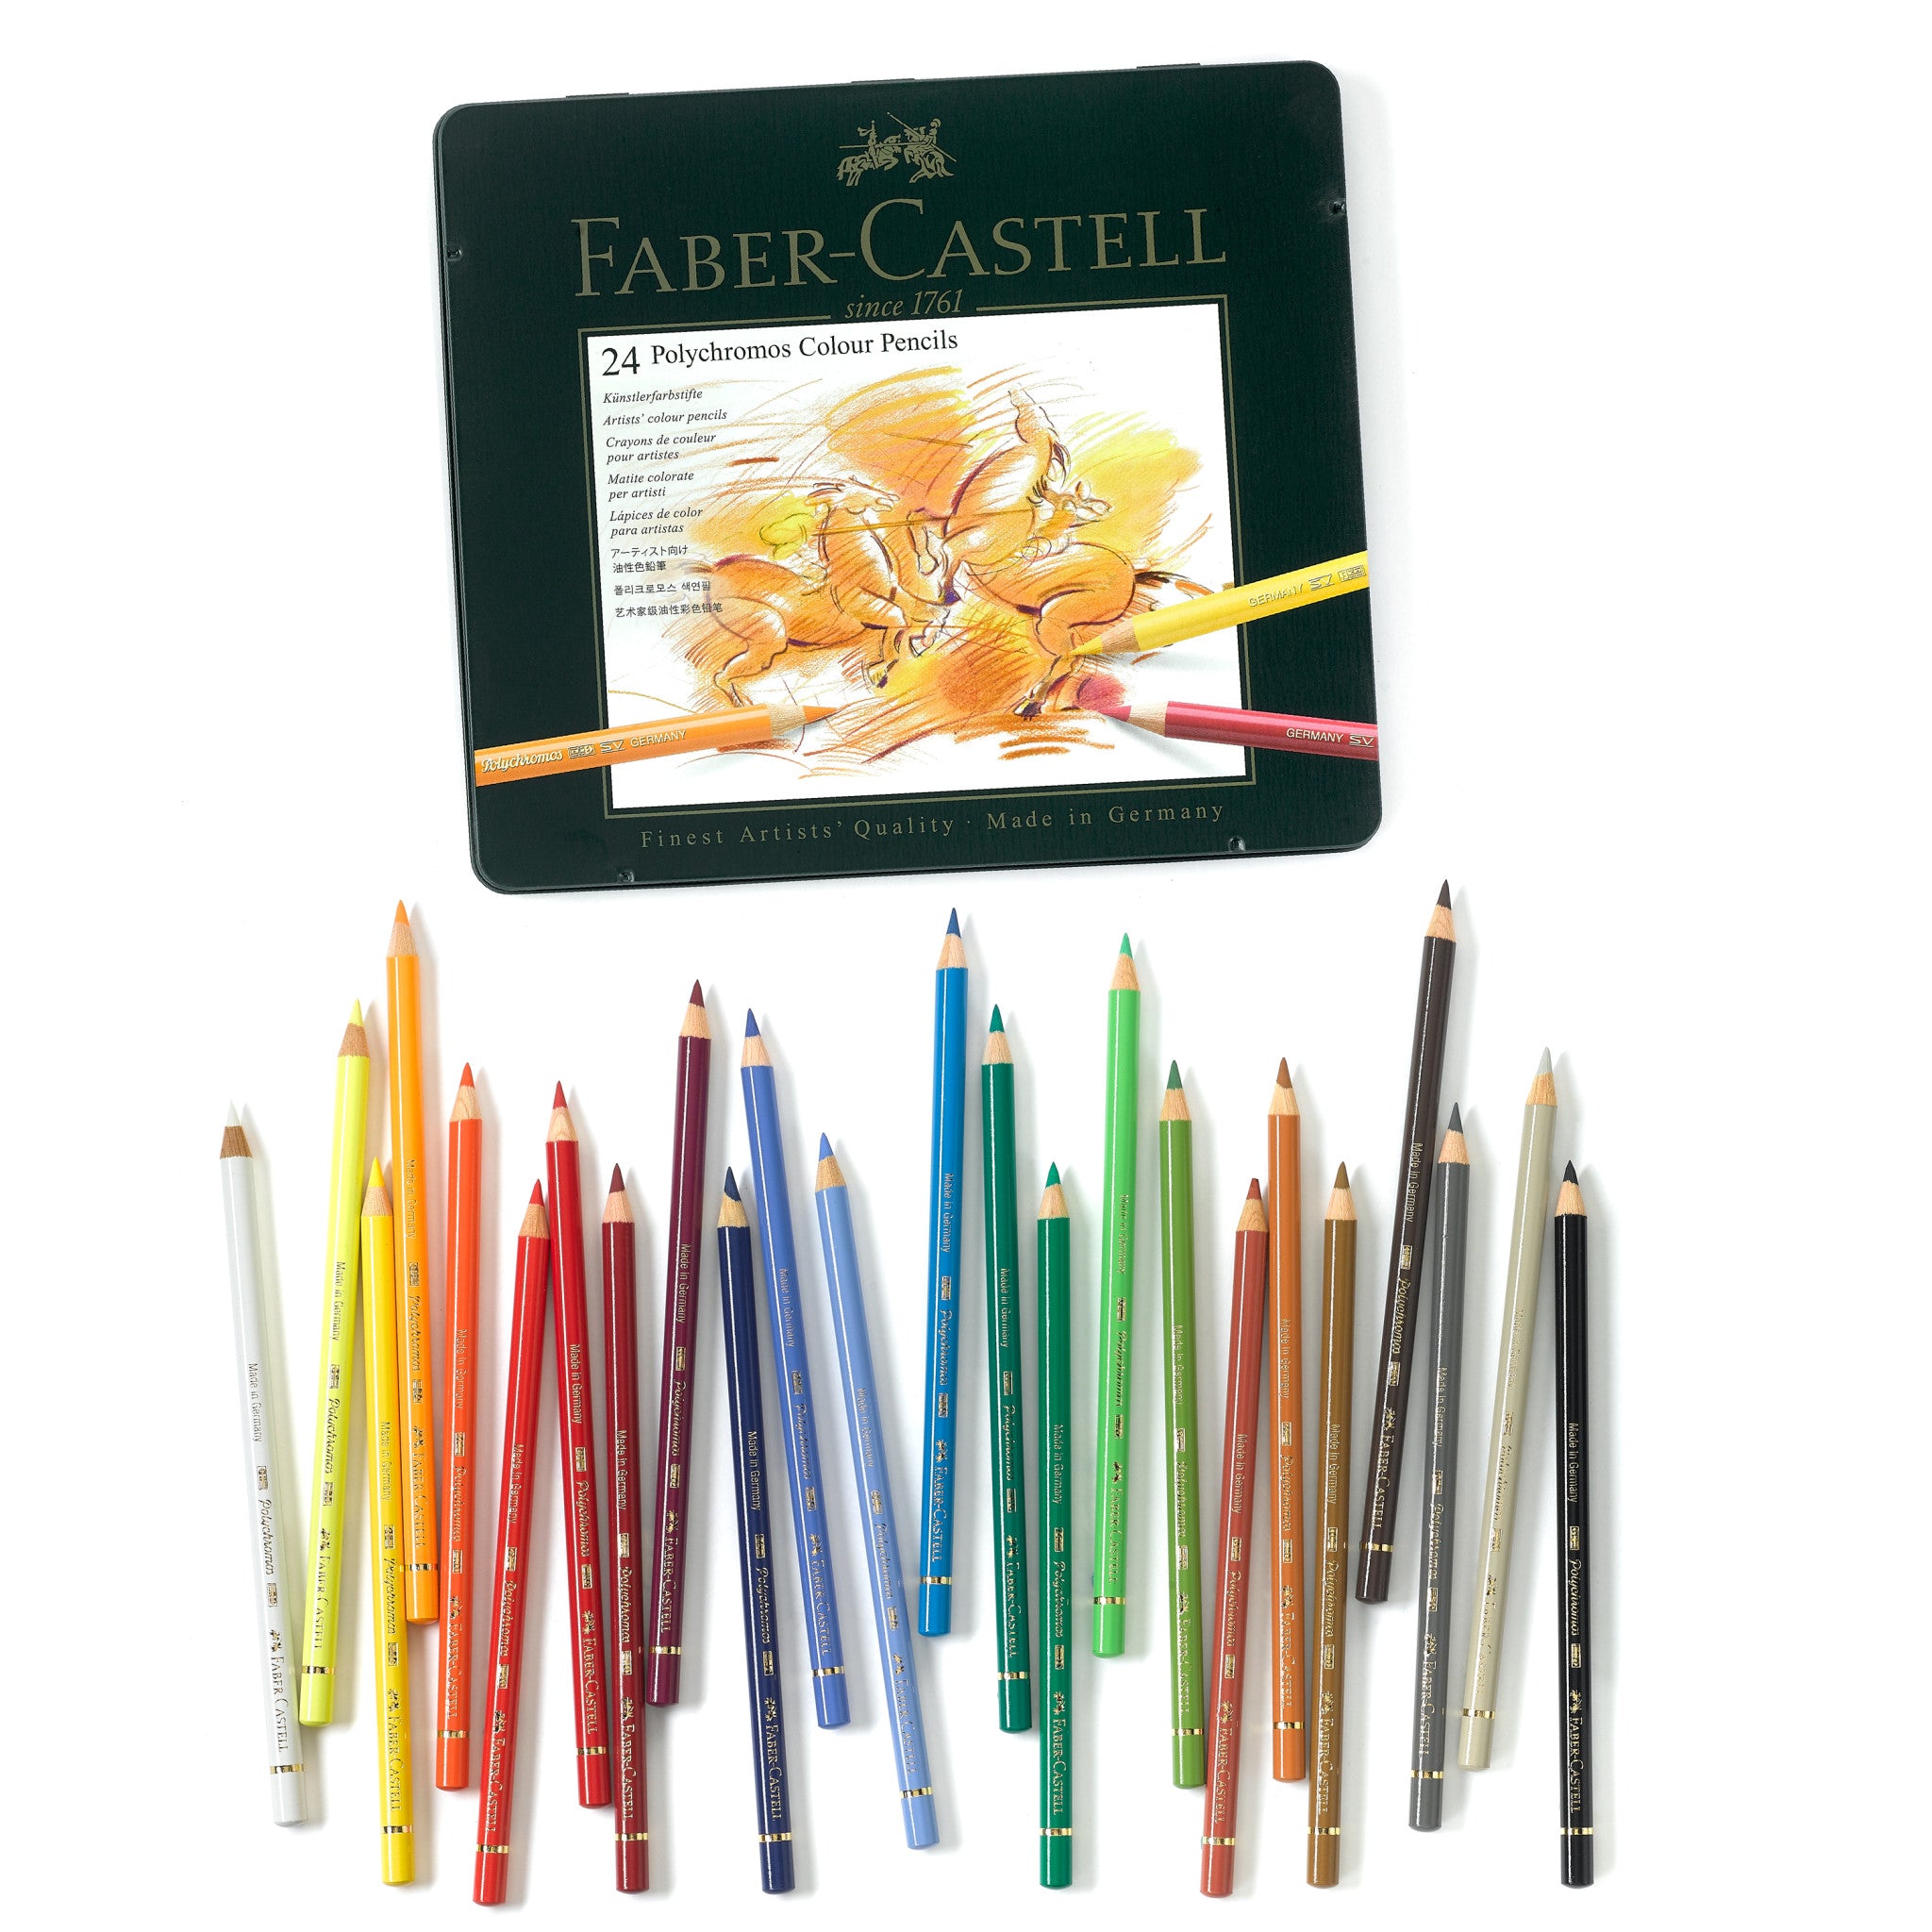 FABER CASTELL: Polychromos Colored Pencil (Light Chrome Yellow) – Doodlebugs